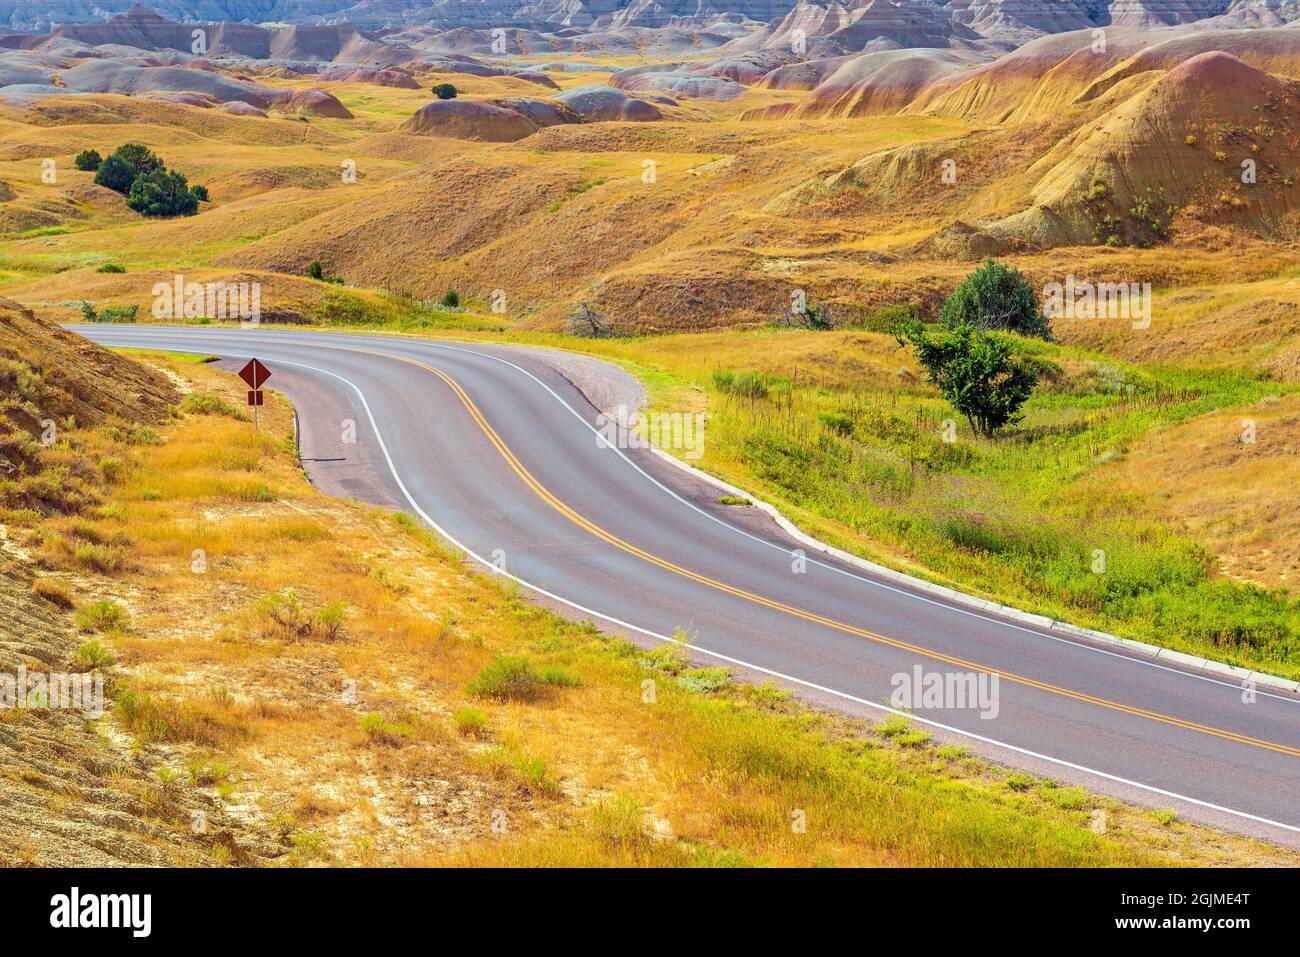 On the road highway by the Yellow Mounds, Badlands national park, South Dakota, USA. Stock Photo